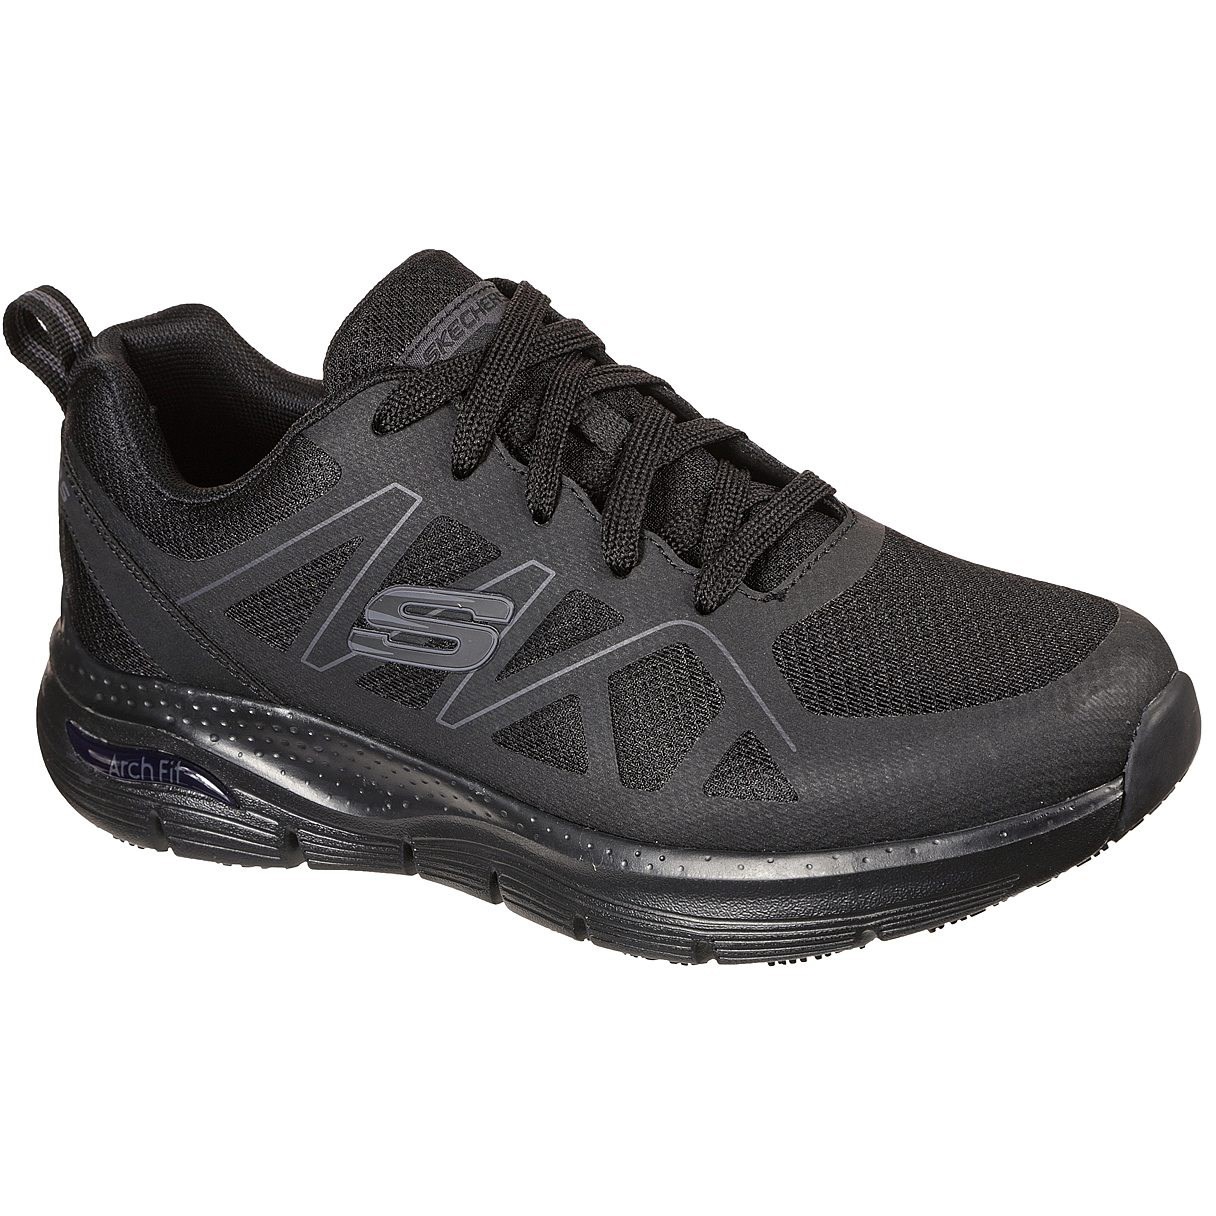 Arch Fit SR Axtell Occupational Shoe